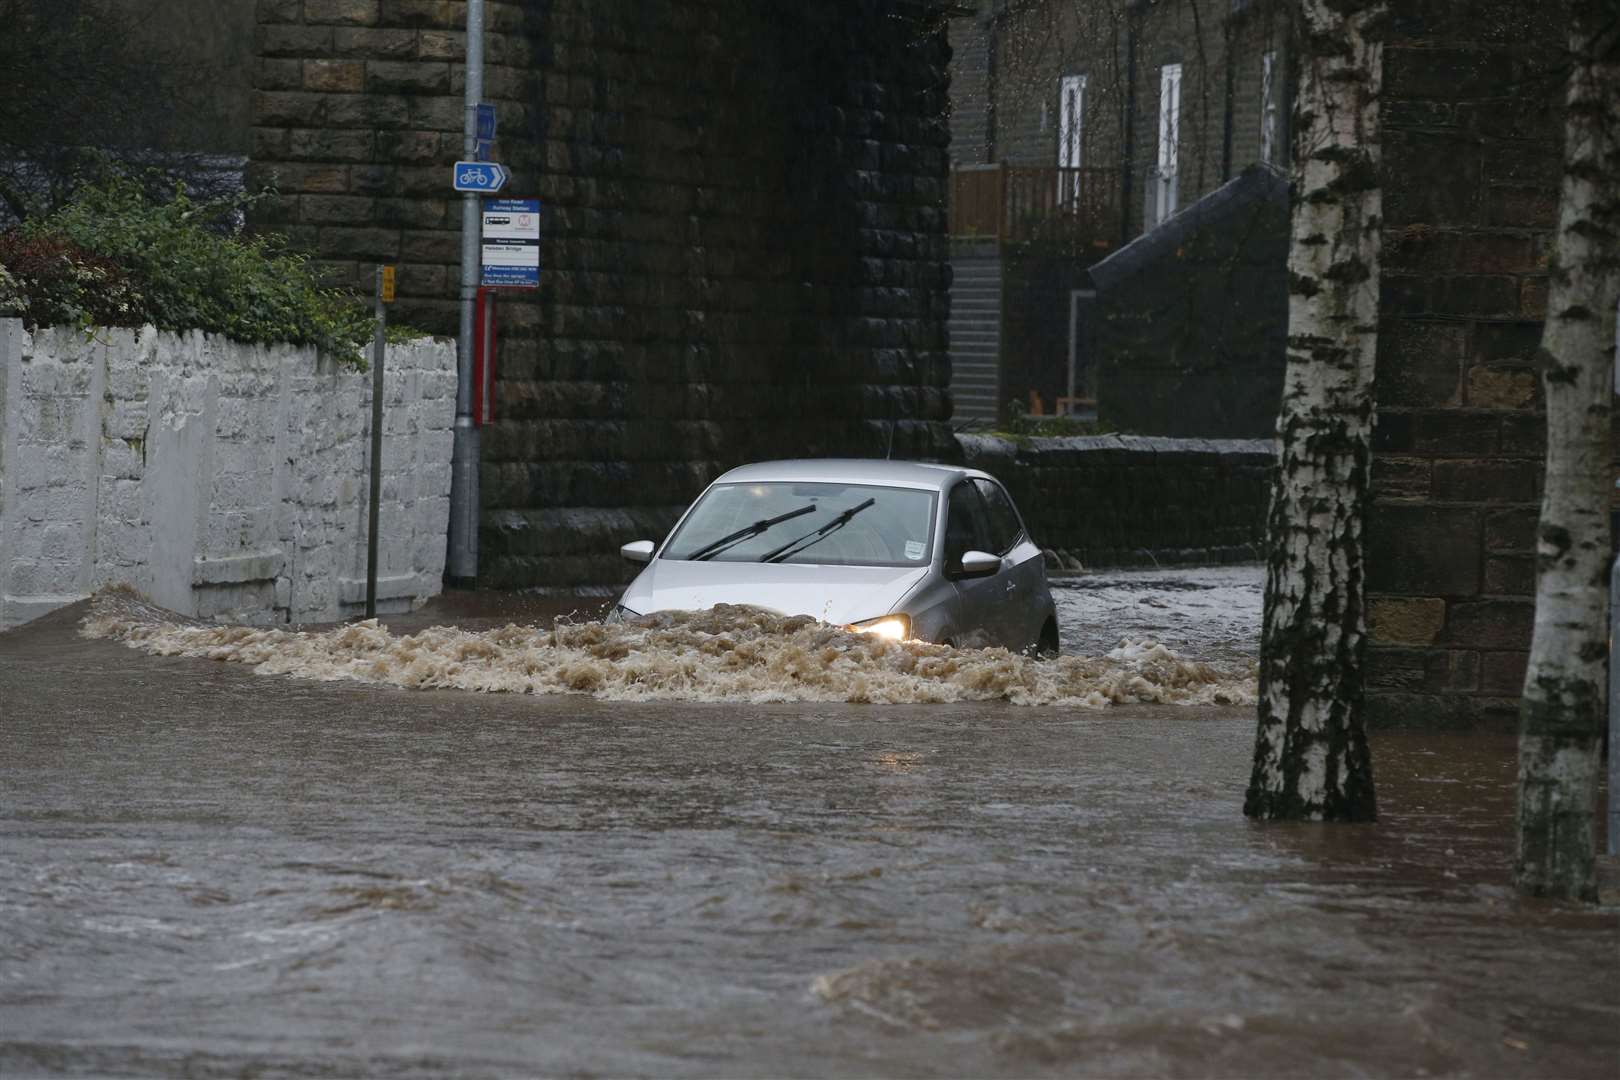 Flooding in Mytholmroyd in Calderdale, West Yorkshire, on Boxing Day 2015 (PA)